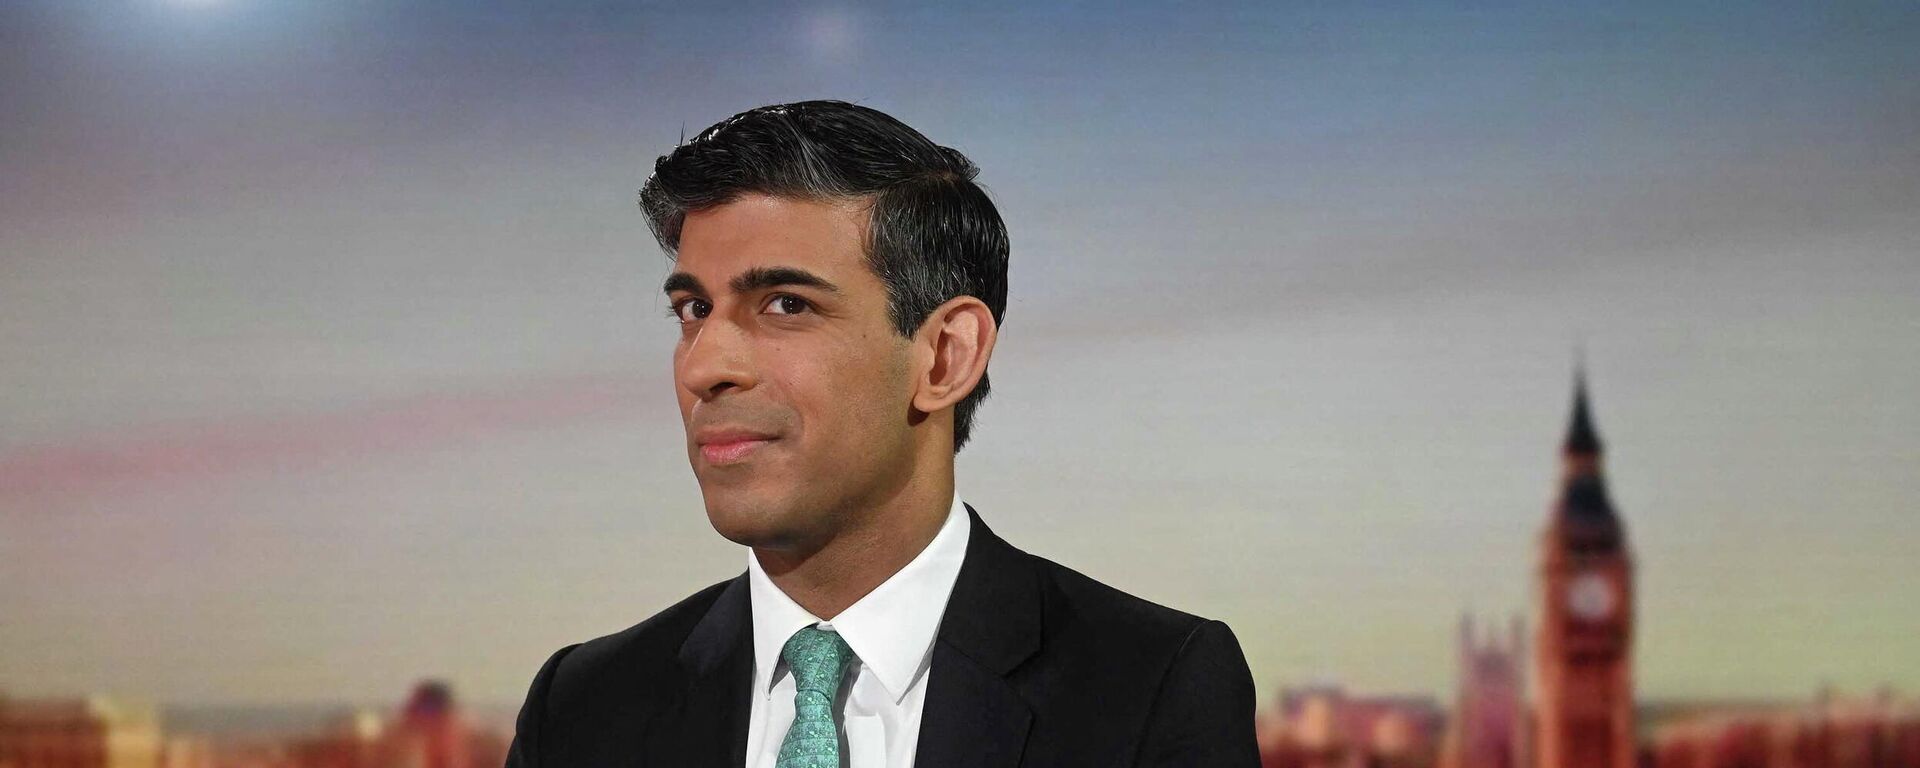 Britain's Chancellor of the Exchequer Rishi Sunak appears on BBC's Sunday Morning presented by Sophie Raworth in London - Sputnik International, 1920, 21.03.2022